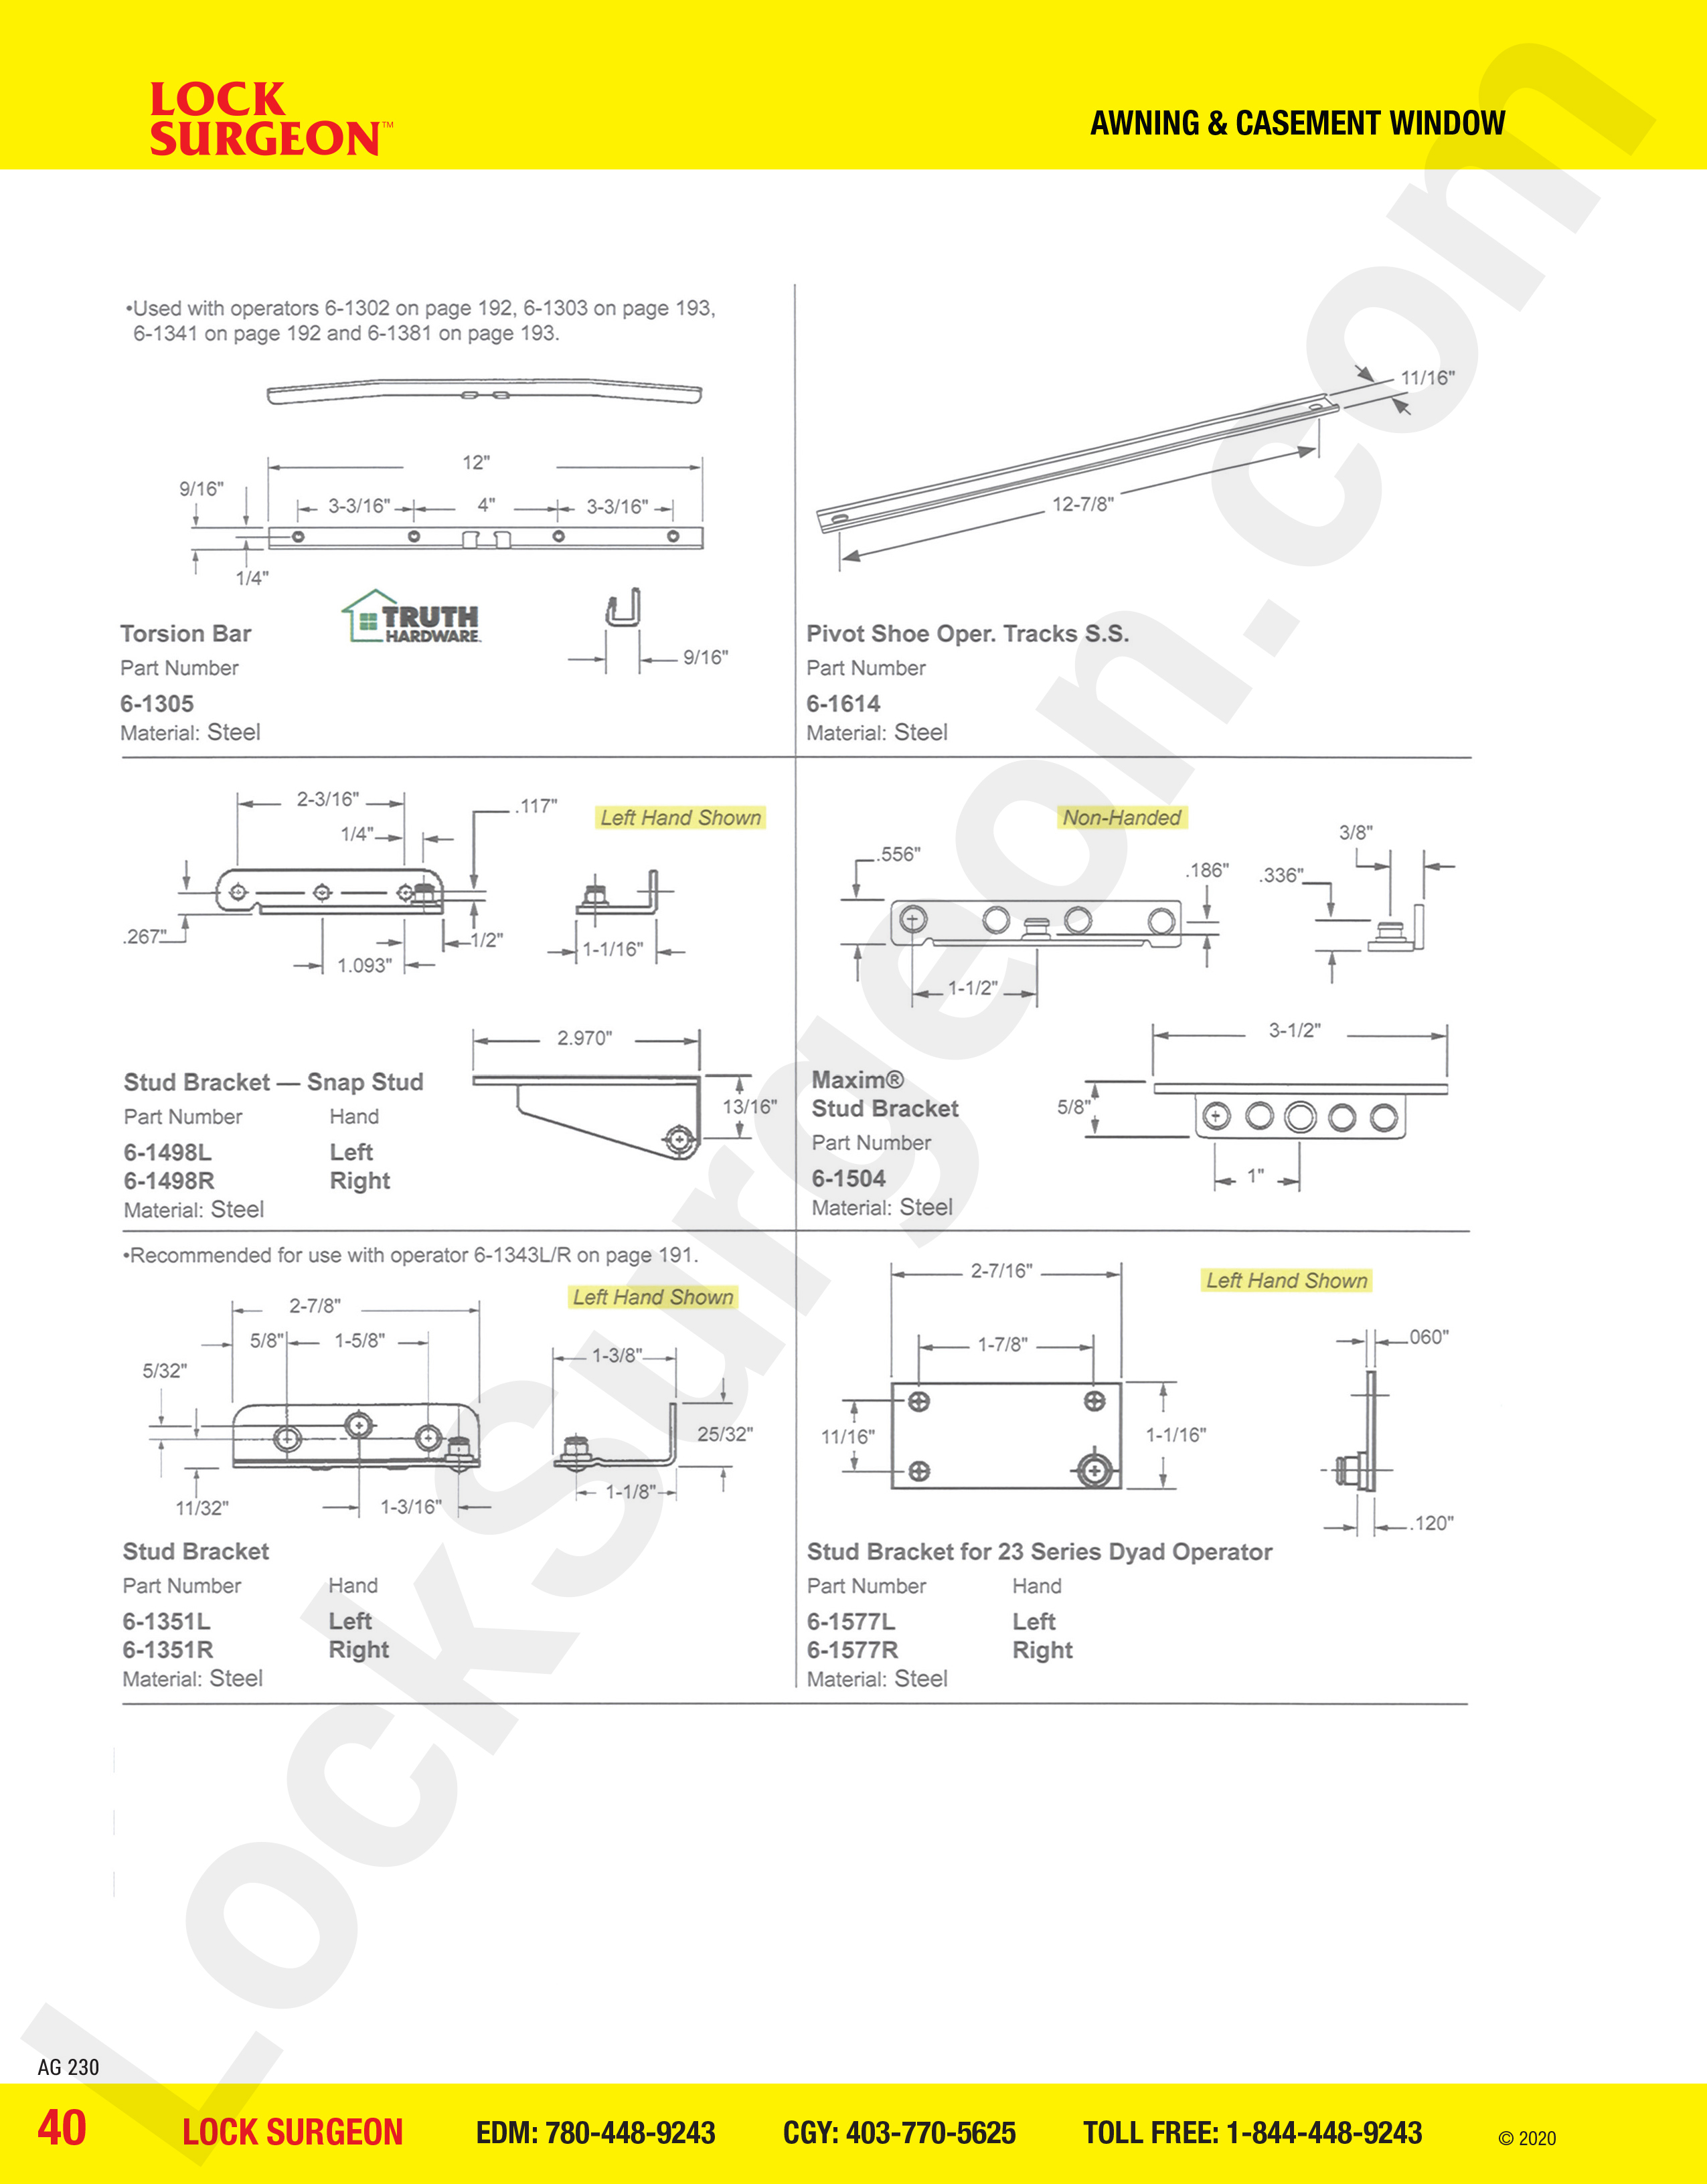 awning and casement window parts for stud brackets.